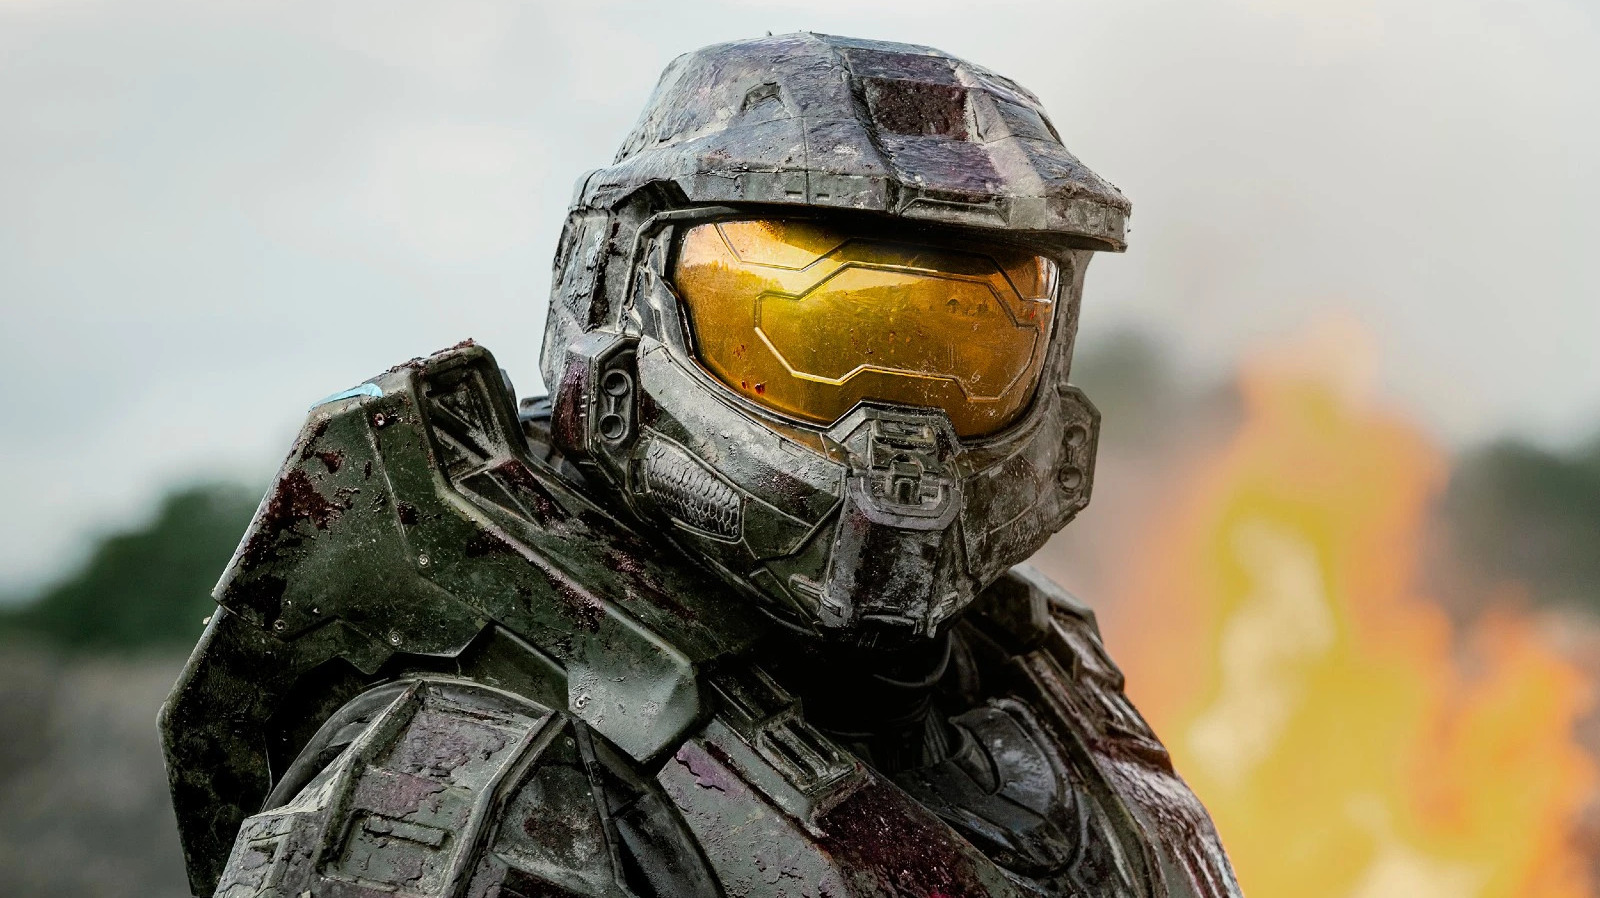 Halo Season 2 Everything We Know So Far About The Return Of The Video